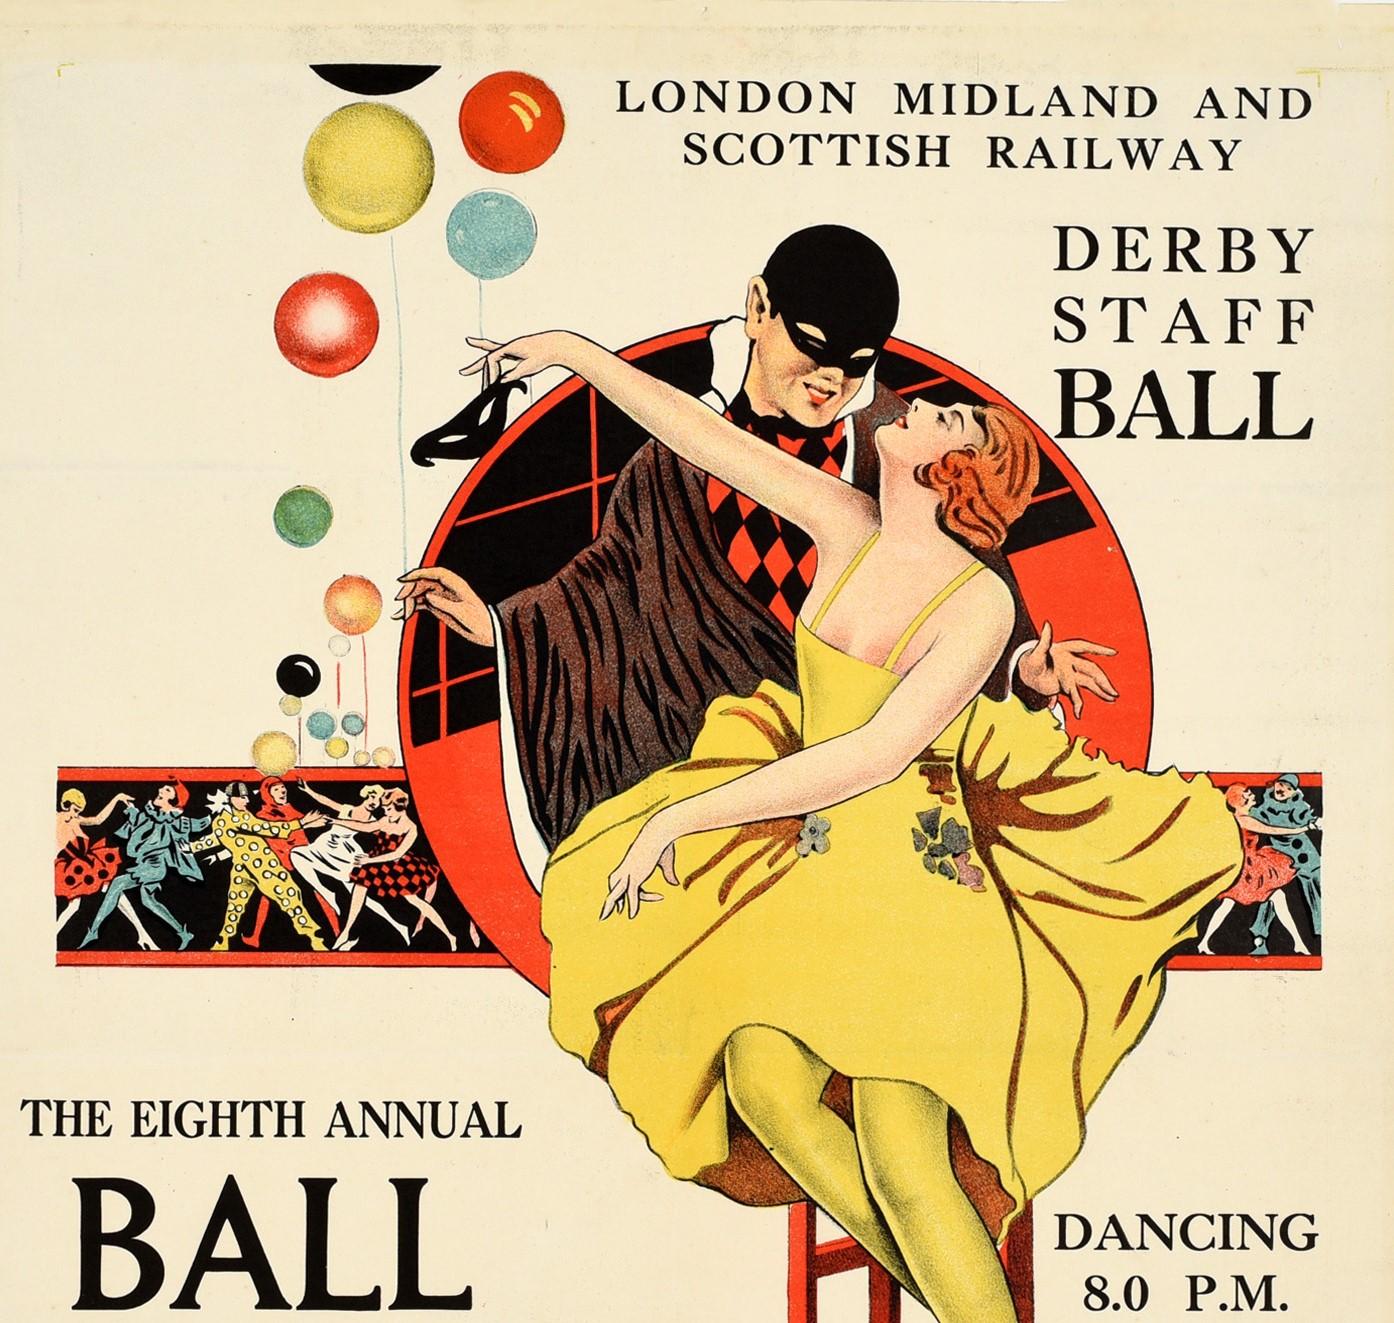 Original vintage LMS poster for the London Midland and Scottish Railway Derby Staff Ball - The Eighth Annual Derby Staff Ball (to which all Ladies and Gentlemen of the Salaried Staff in the LMS Service are invited) will be held in the County